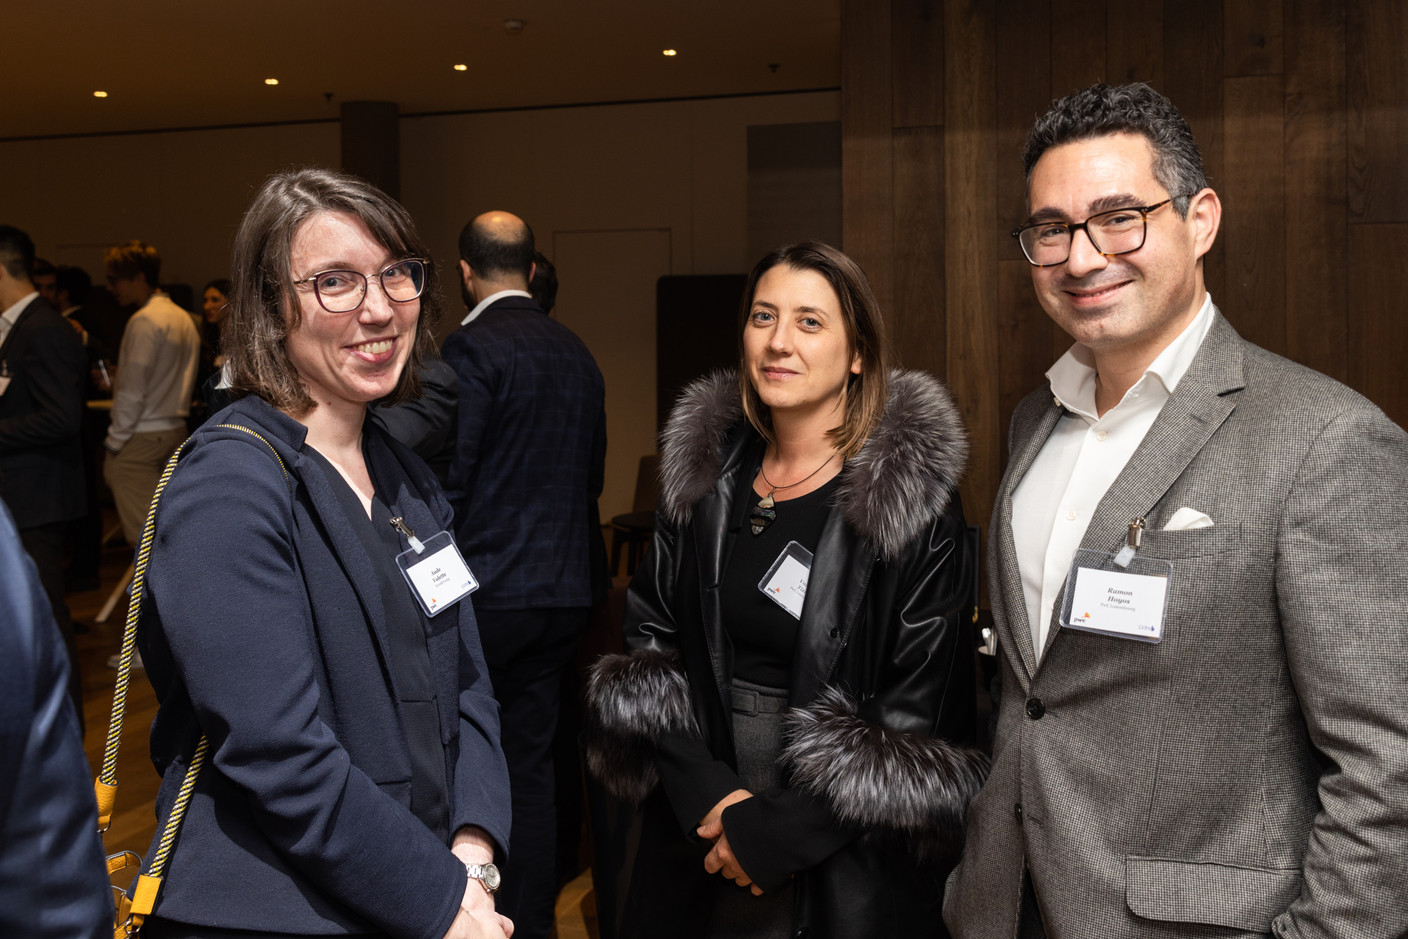 Aude Valette, Valerie Tixier and Ramon Hoyos at the LVPA launch event. Romain Gamba